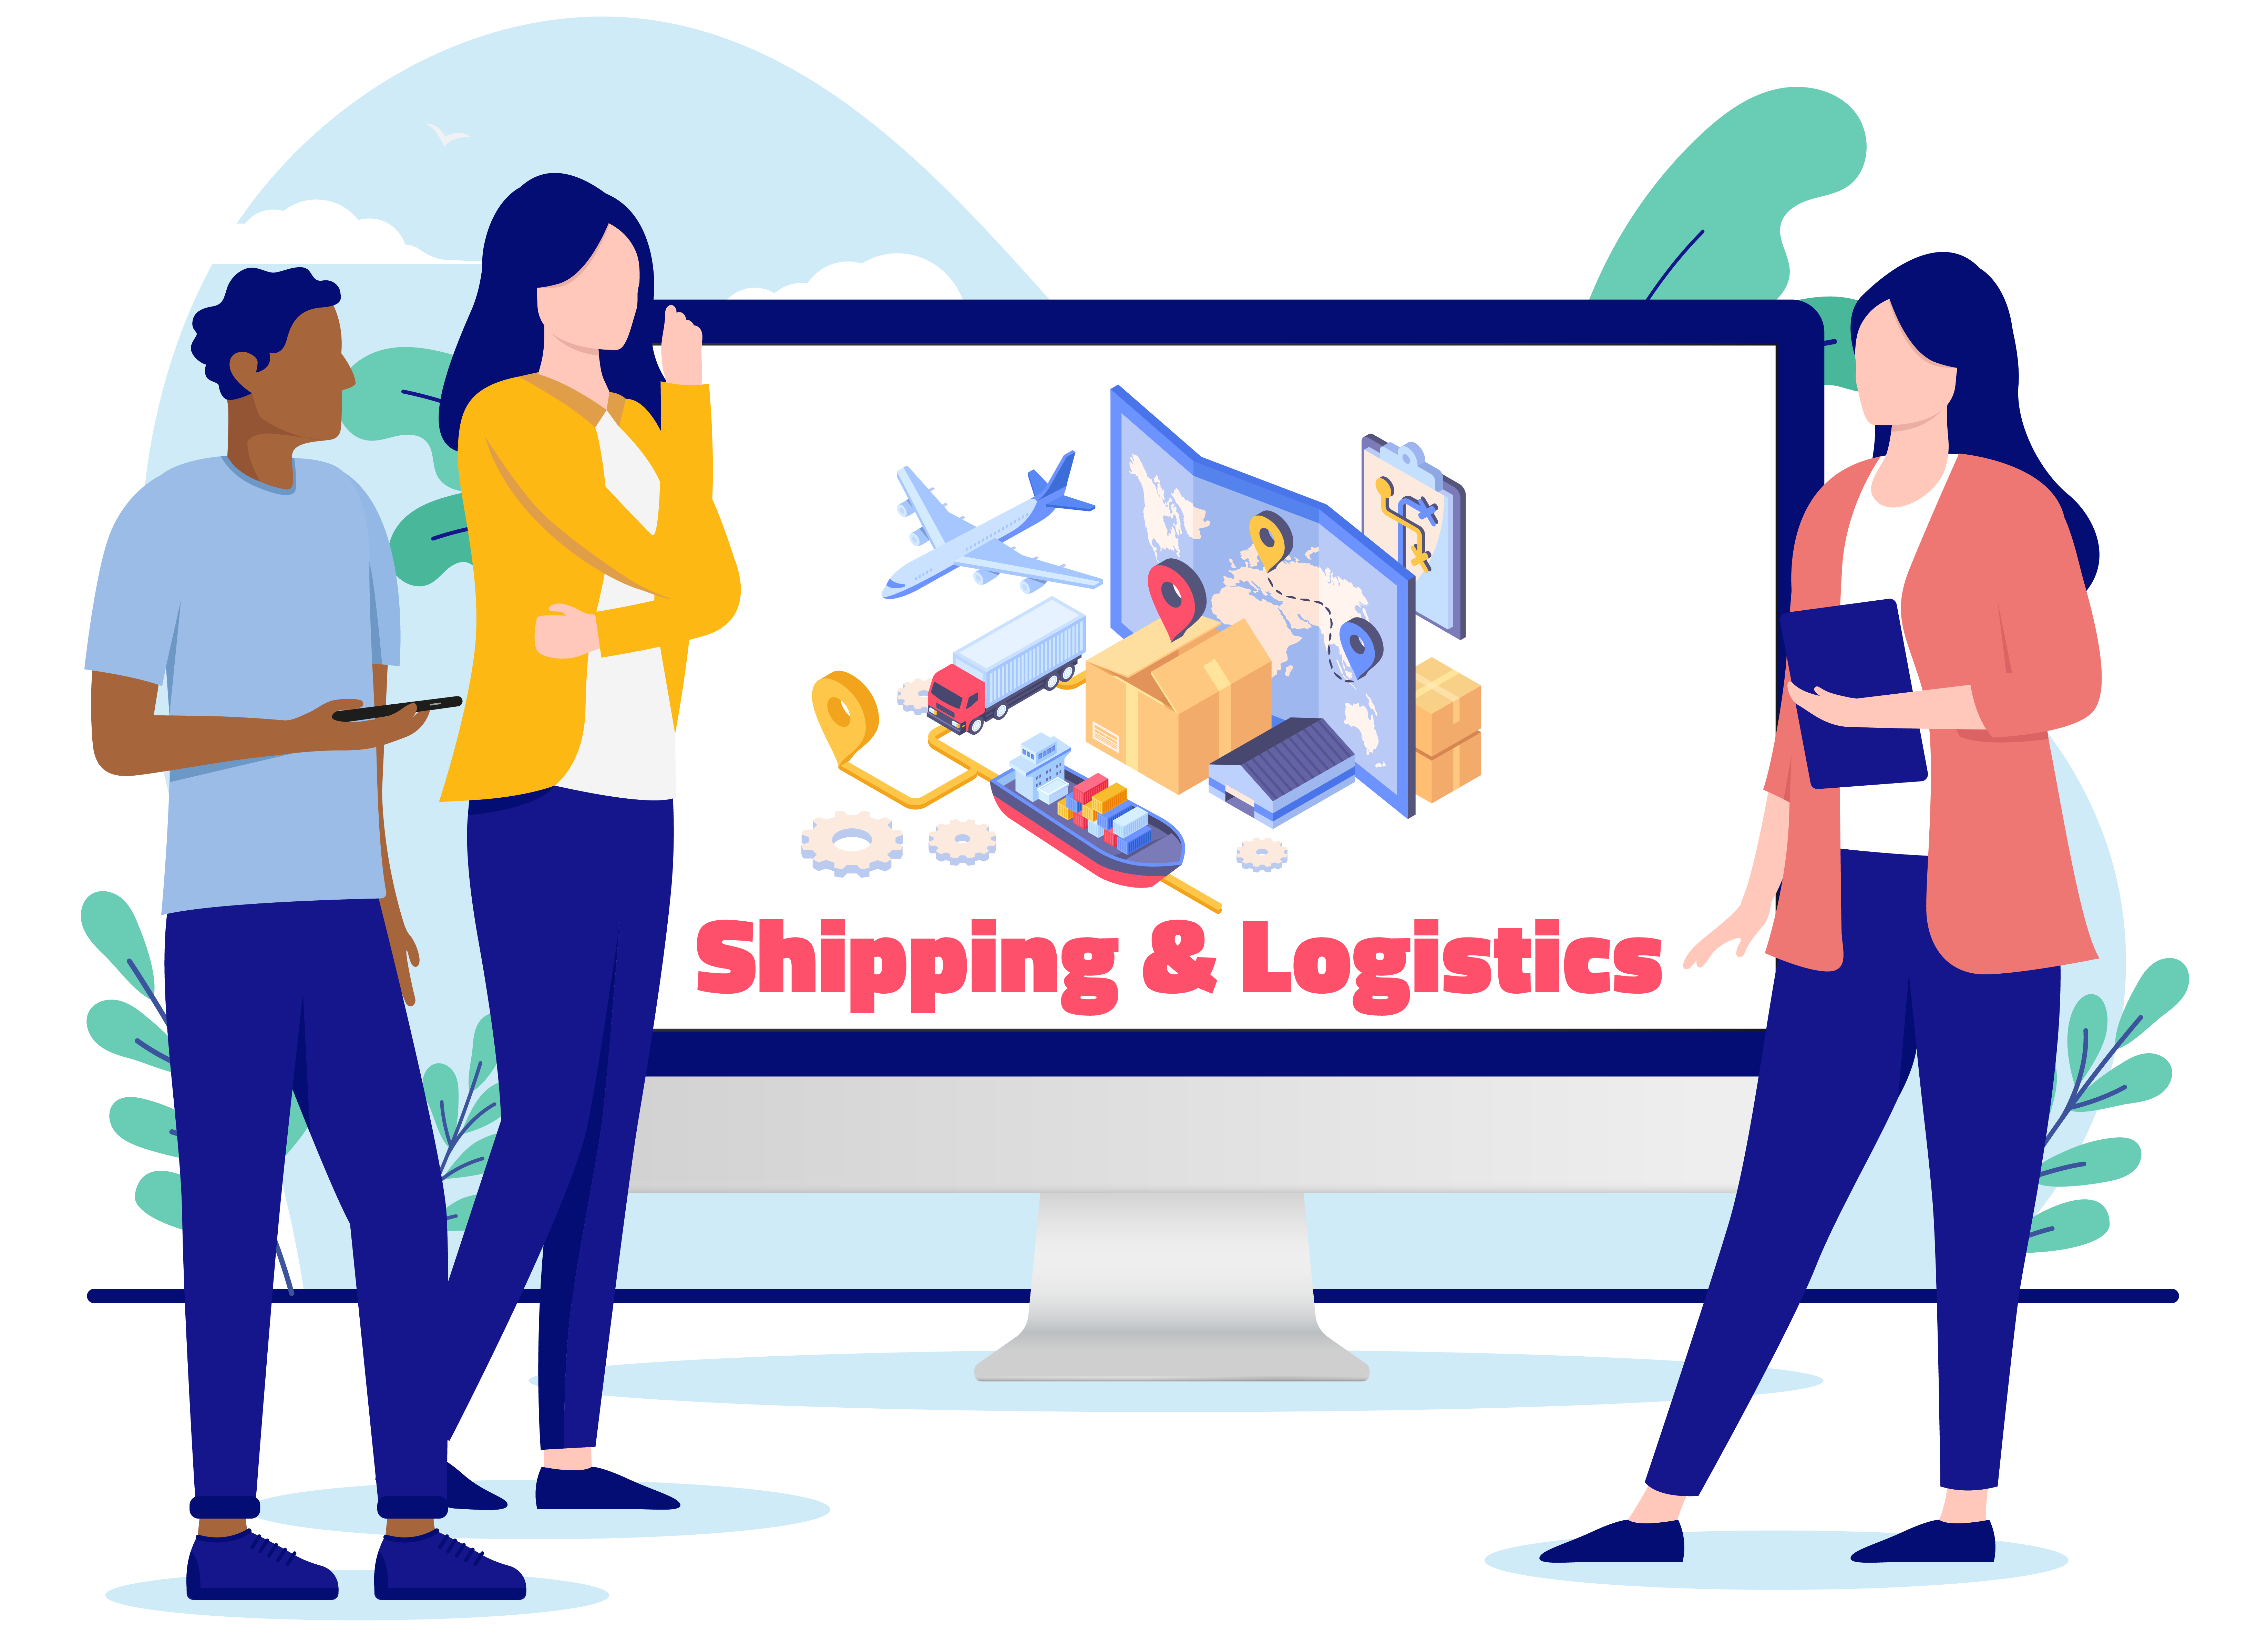  A visual with cartoon images of men and women standing with a big screen in which text "shipping & logistics" is written